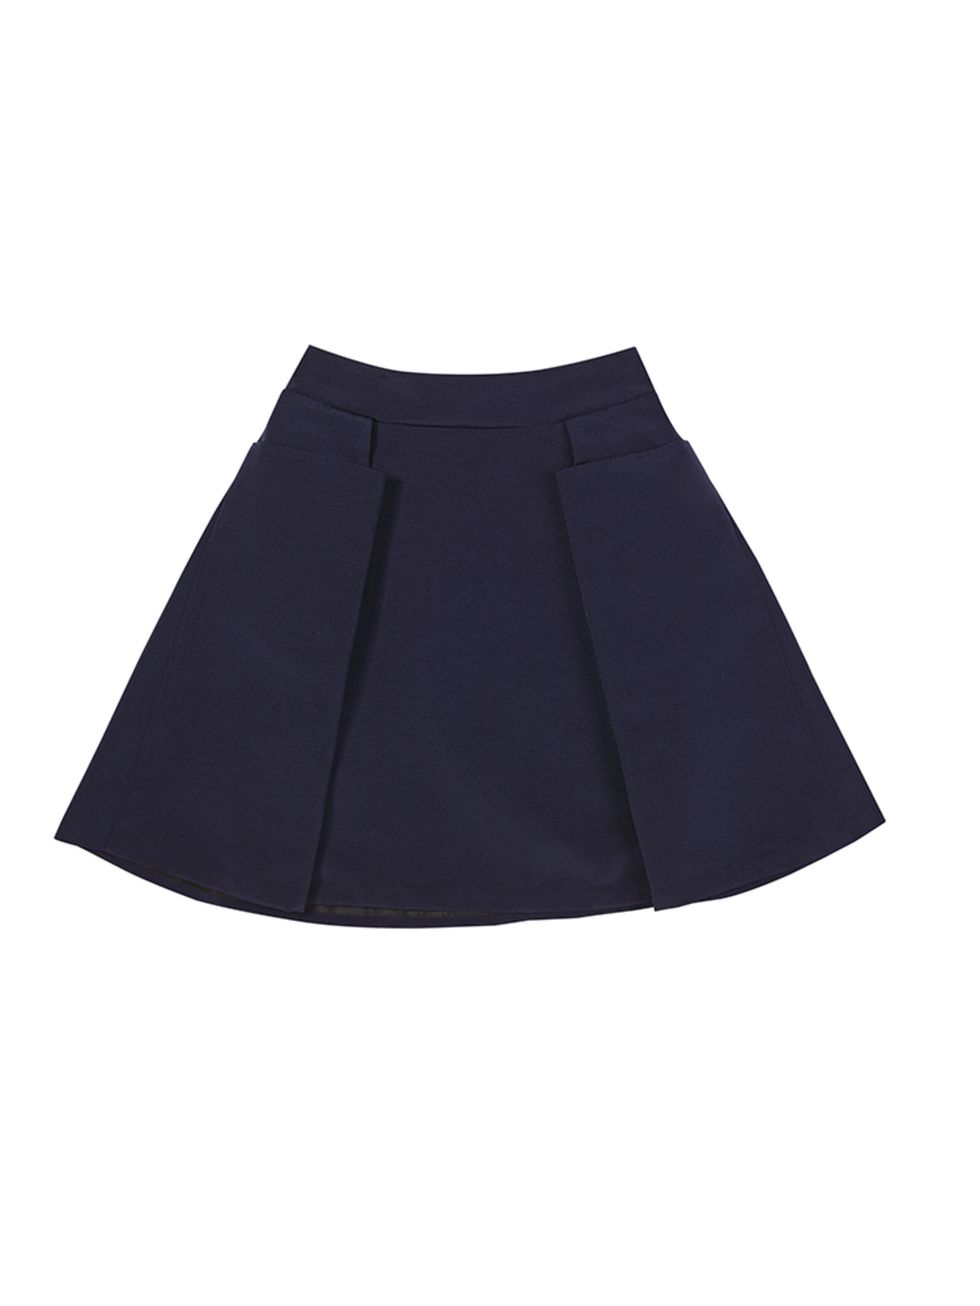 <p>Navy skirt, £85 from <a href="http://www.llunaa.com/nproduct2.php?serial=297">llunna</a>.</p>